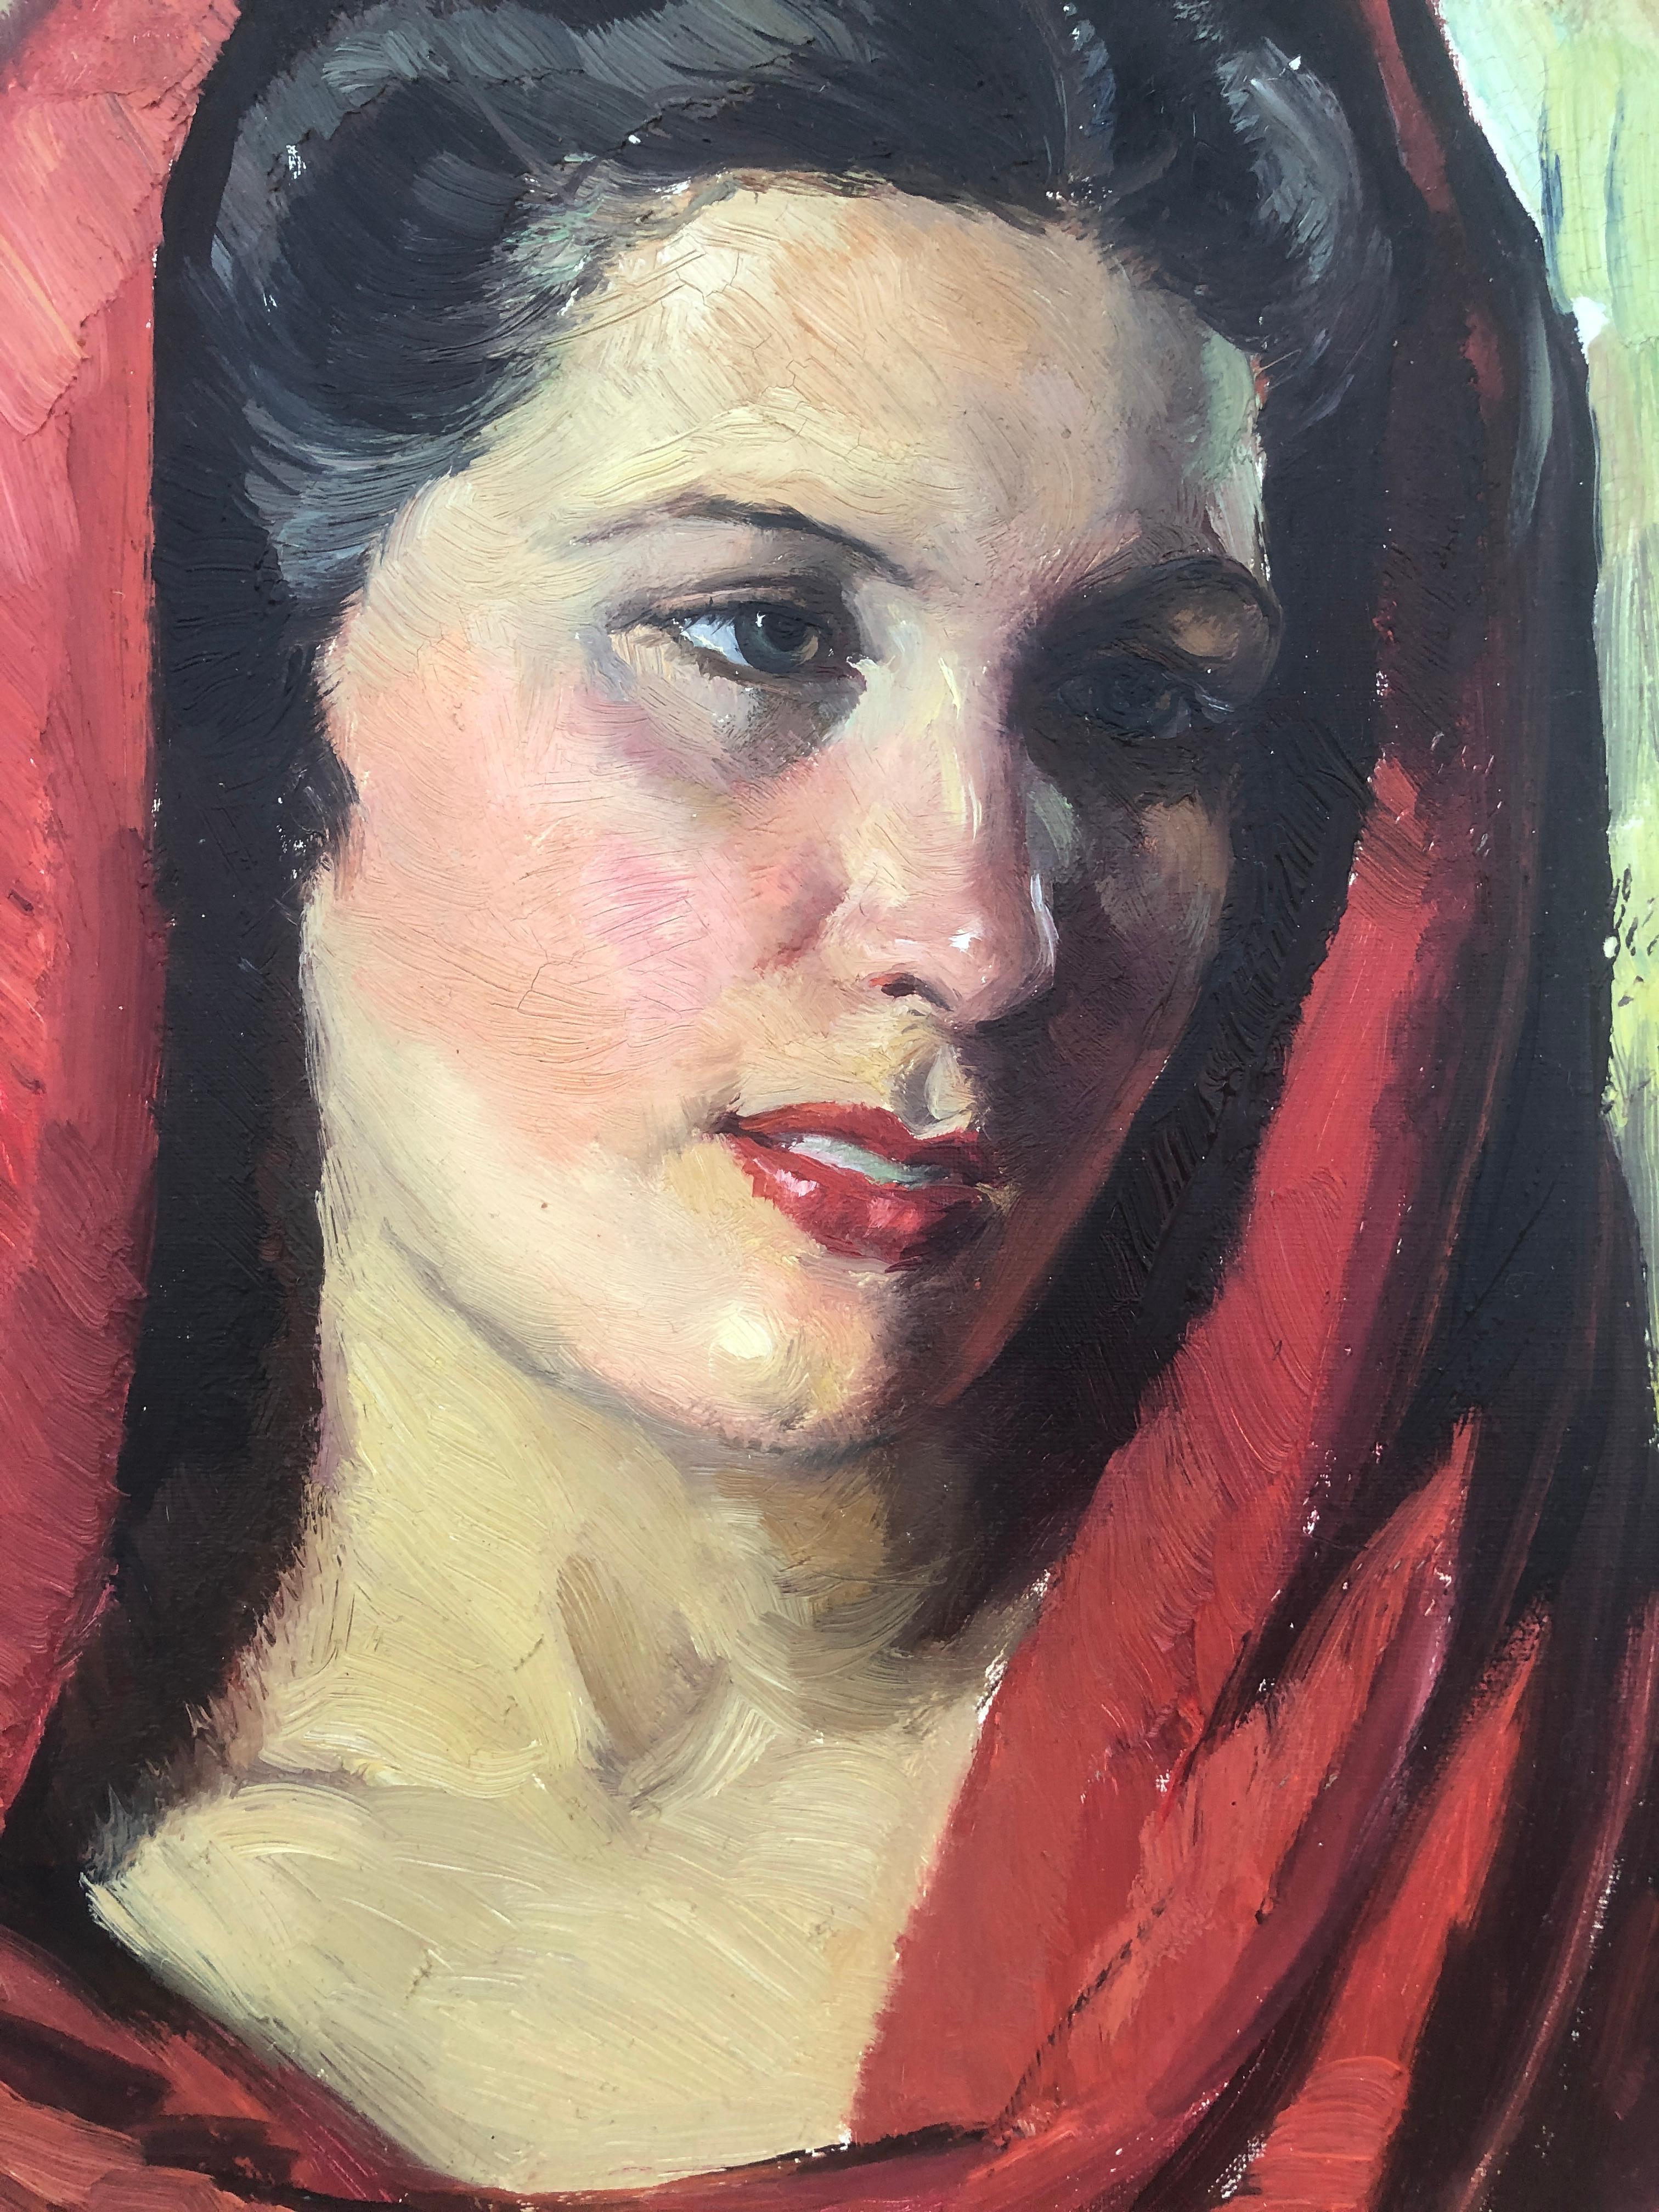 Albert Rafols Cullerés (1892-1986) - Woman with scarf - Oil on canvas
Oil measures 46x38 cm.
Frameless.

Catalan painter formed the Llotja with Lluis Labarta and Arcadi Más and fontdevila and pensioner in Madrid.

He exhibited individually in the